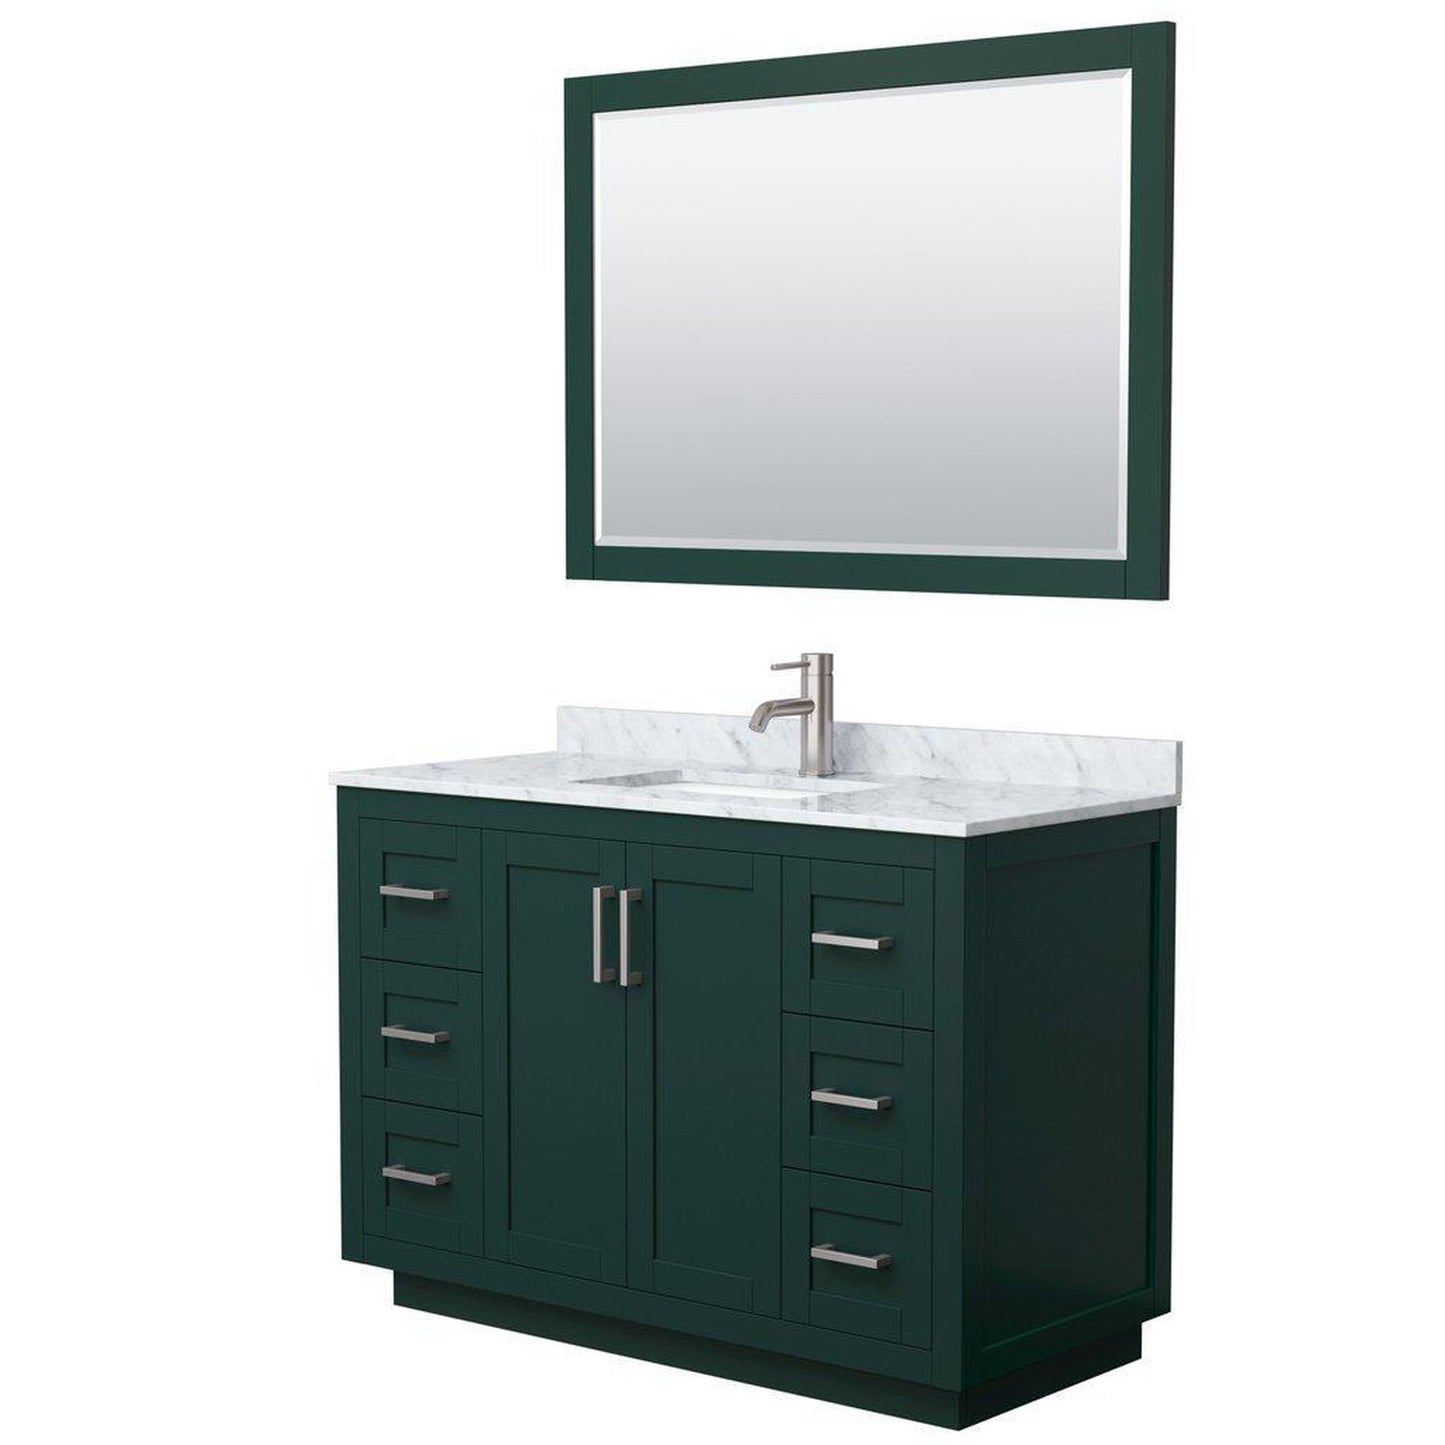 Wyndham Collection Miranda 48" Single Bathroom Green Vanity Set With White Carrara Marble Countertop, Undermount Square Sink, 46" Mirror And Brushed Nickel Trim